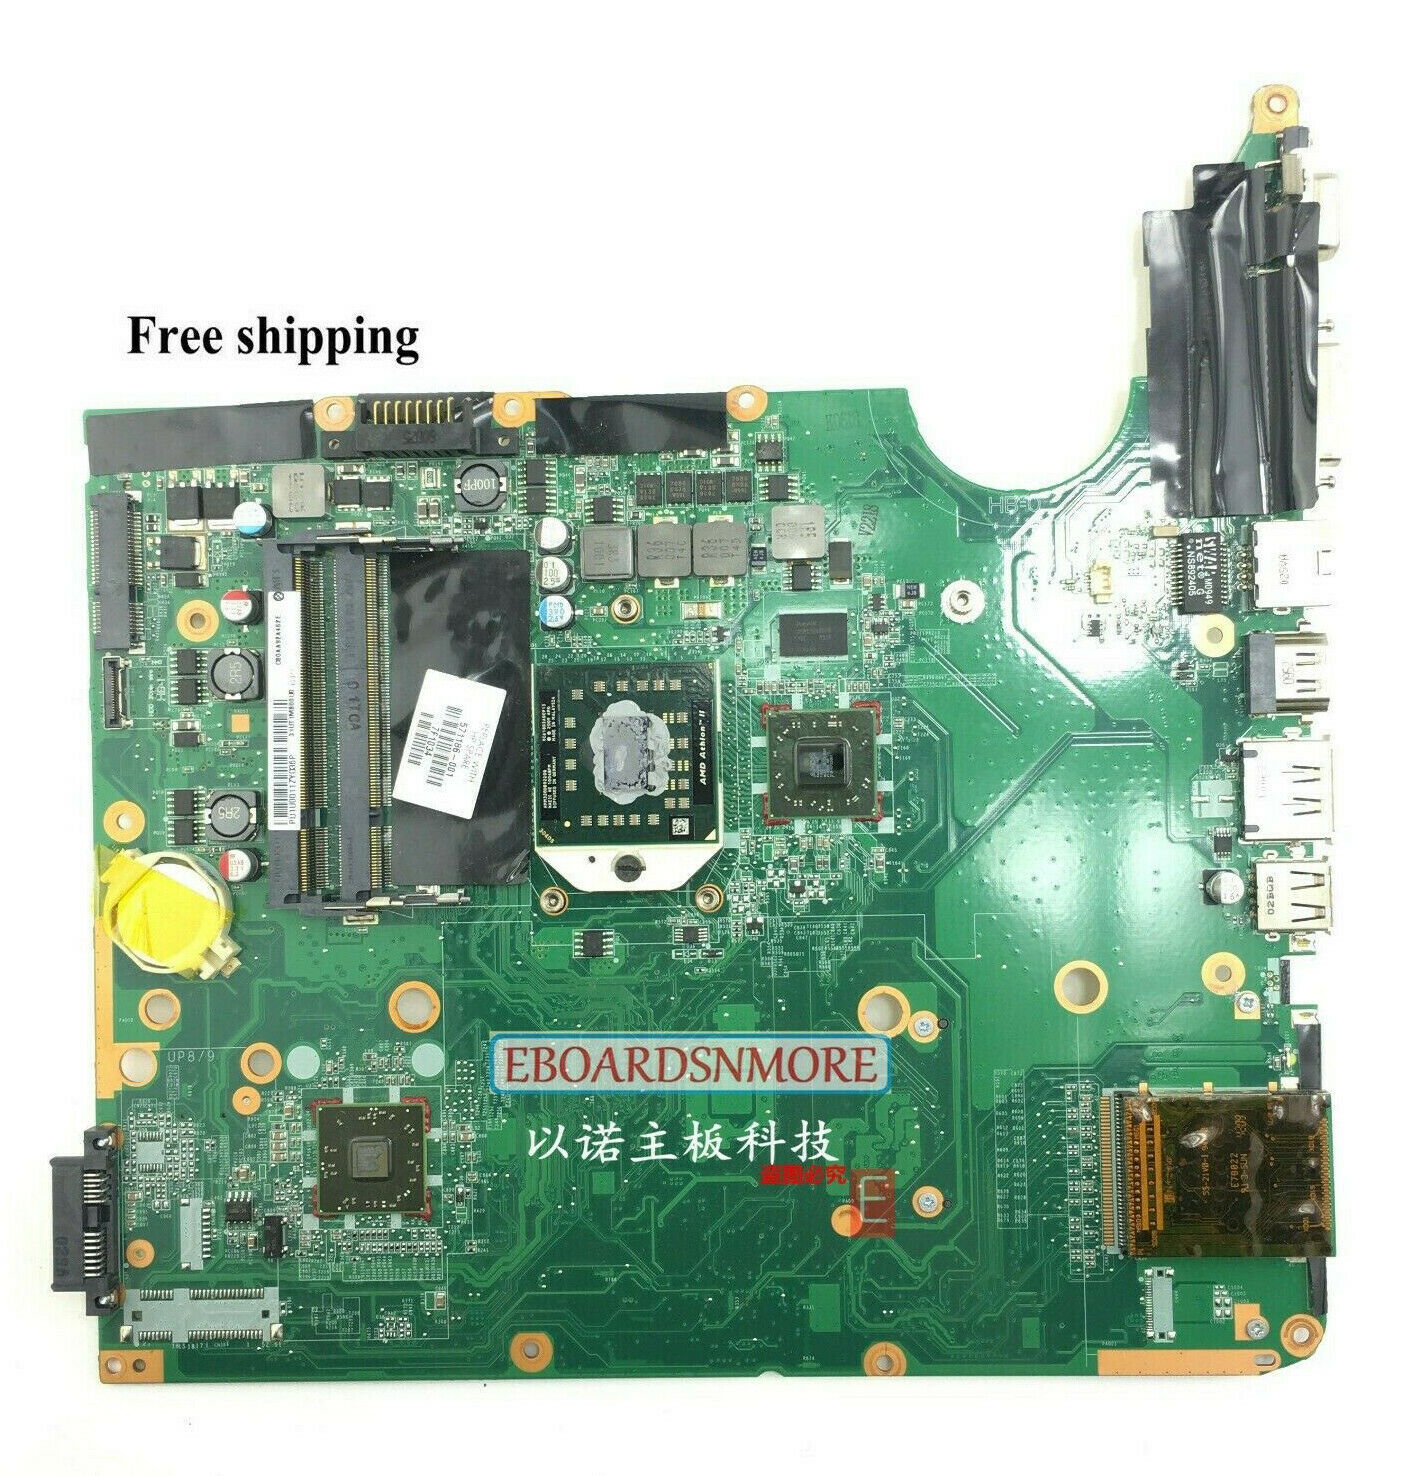 571186-001 AMD MOTHERBOARD for HP PAVILION DV6-2000 -2100 Laptop, ATI HD4250 A Compatible CPU Brand: AMD Me - Click Image to Close